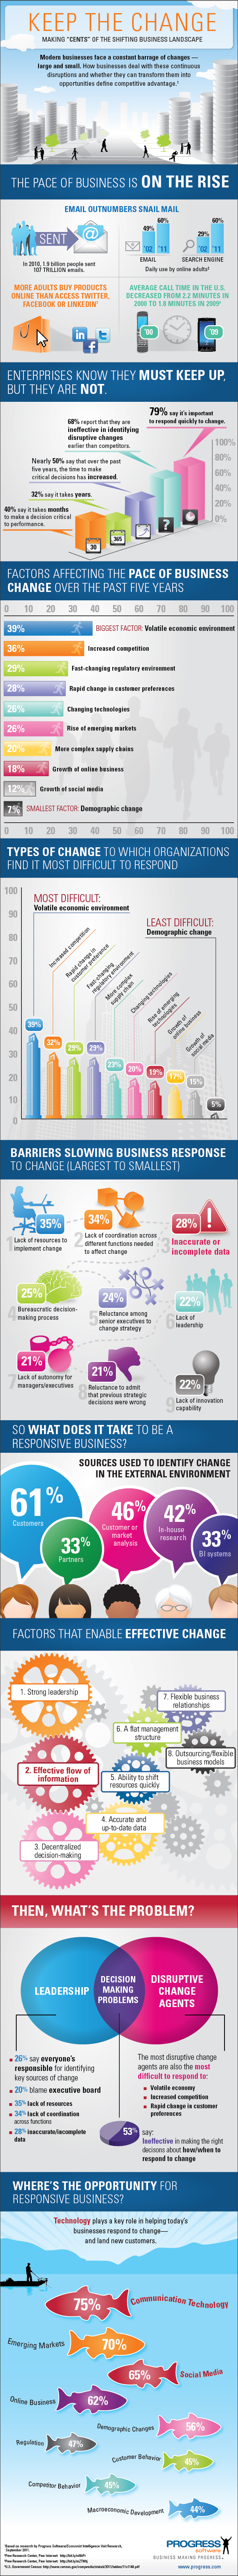 Progress Software infographic based on research from the Economist Intelligence Unit